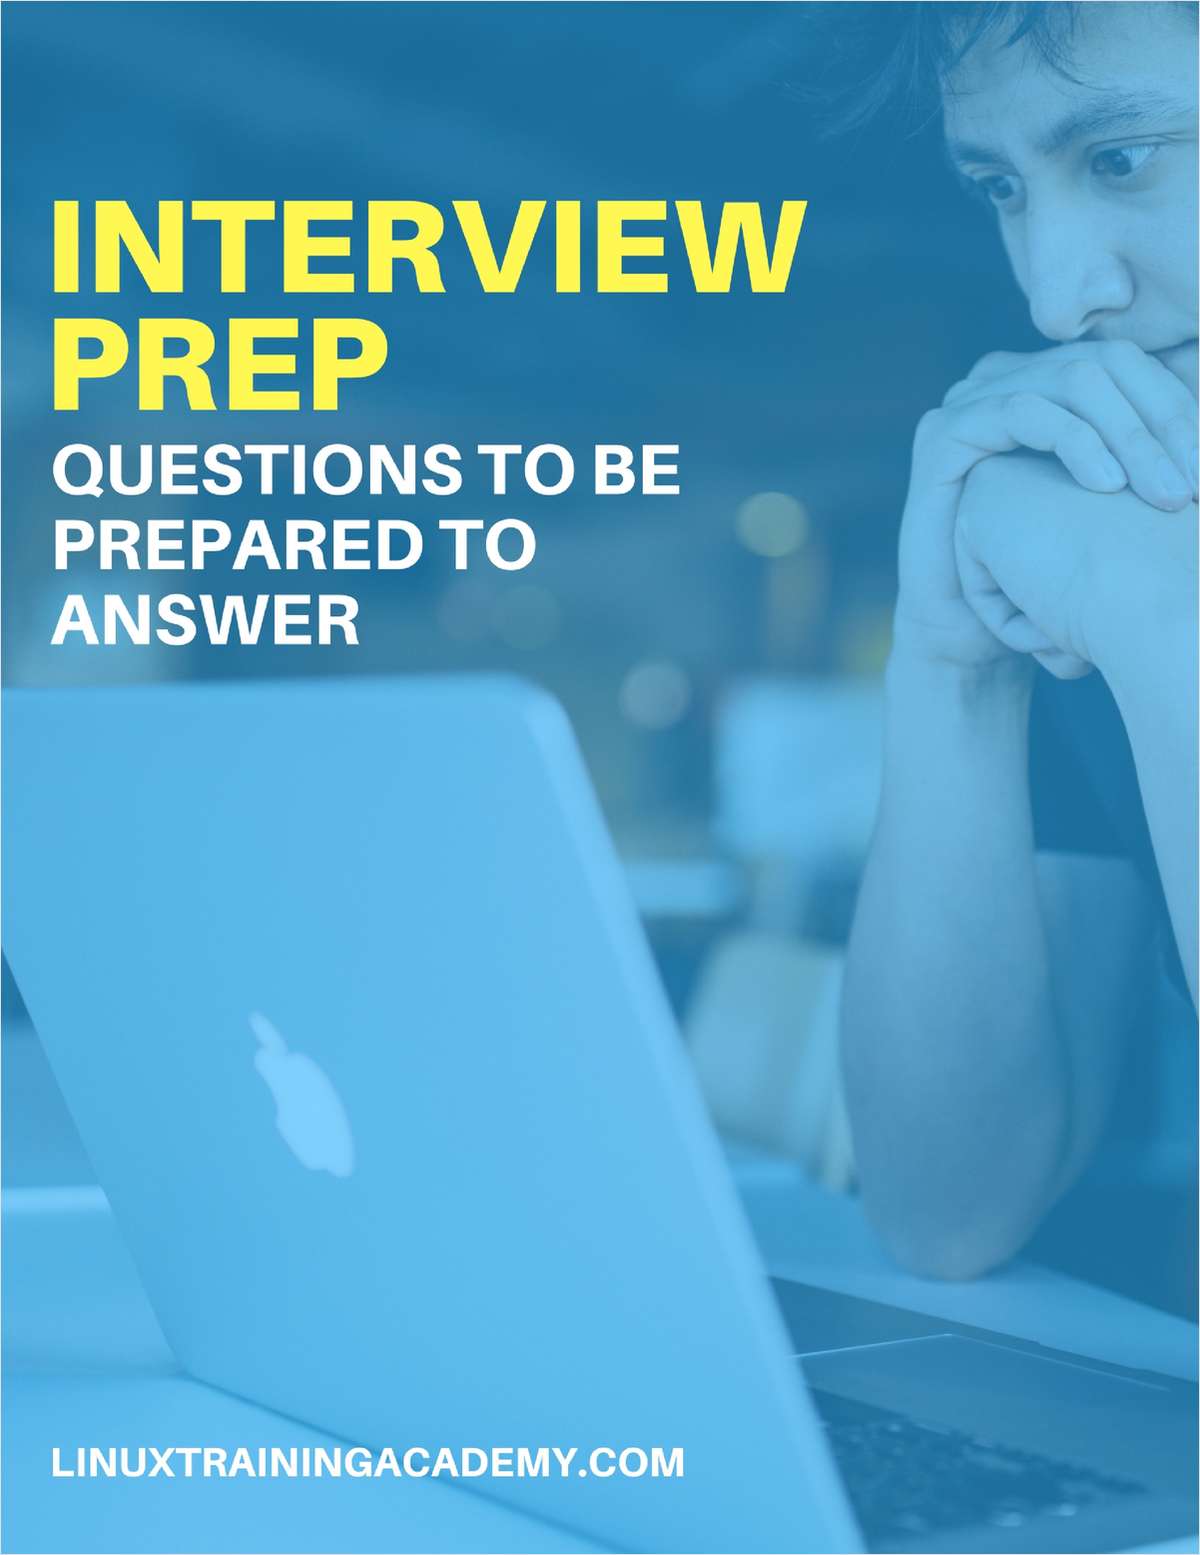 Interview​ ​Prep - ​Questions​ ​to​ ​Be​ ​Prepared​ ​to​ ​Answer